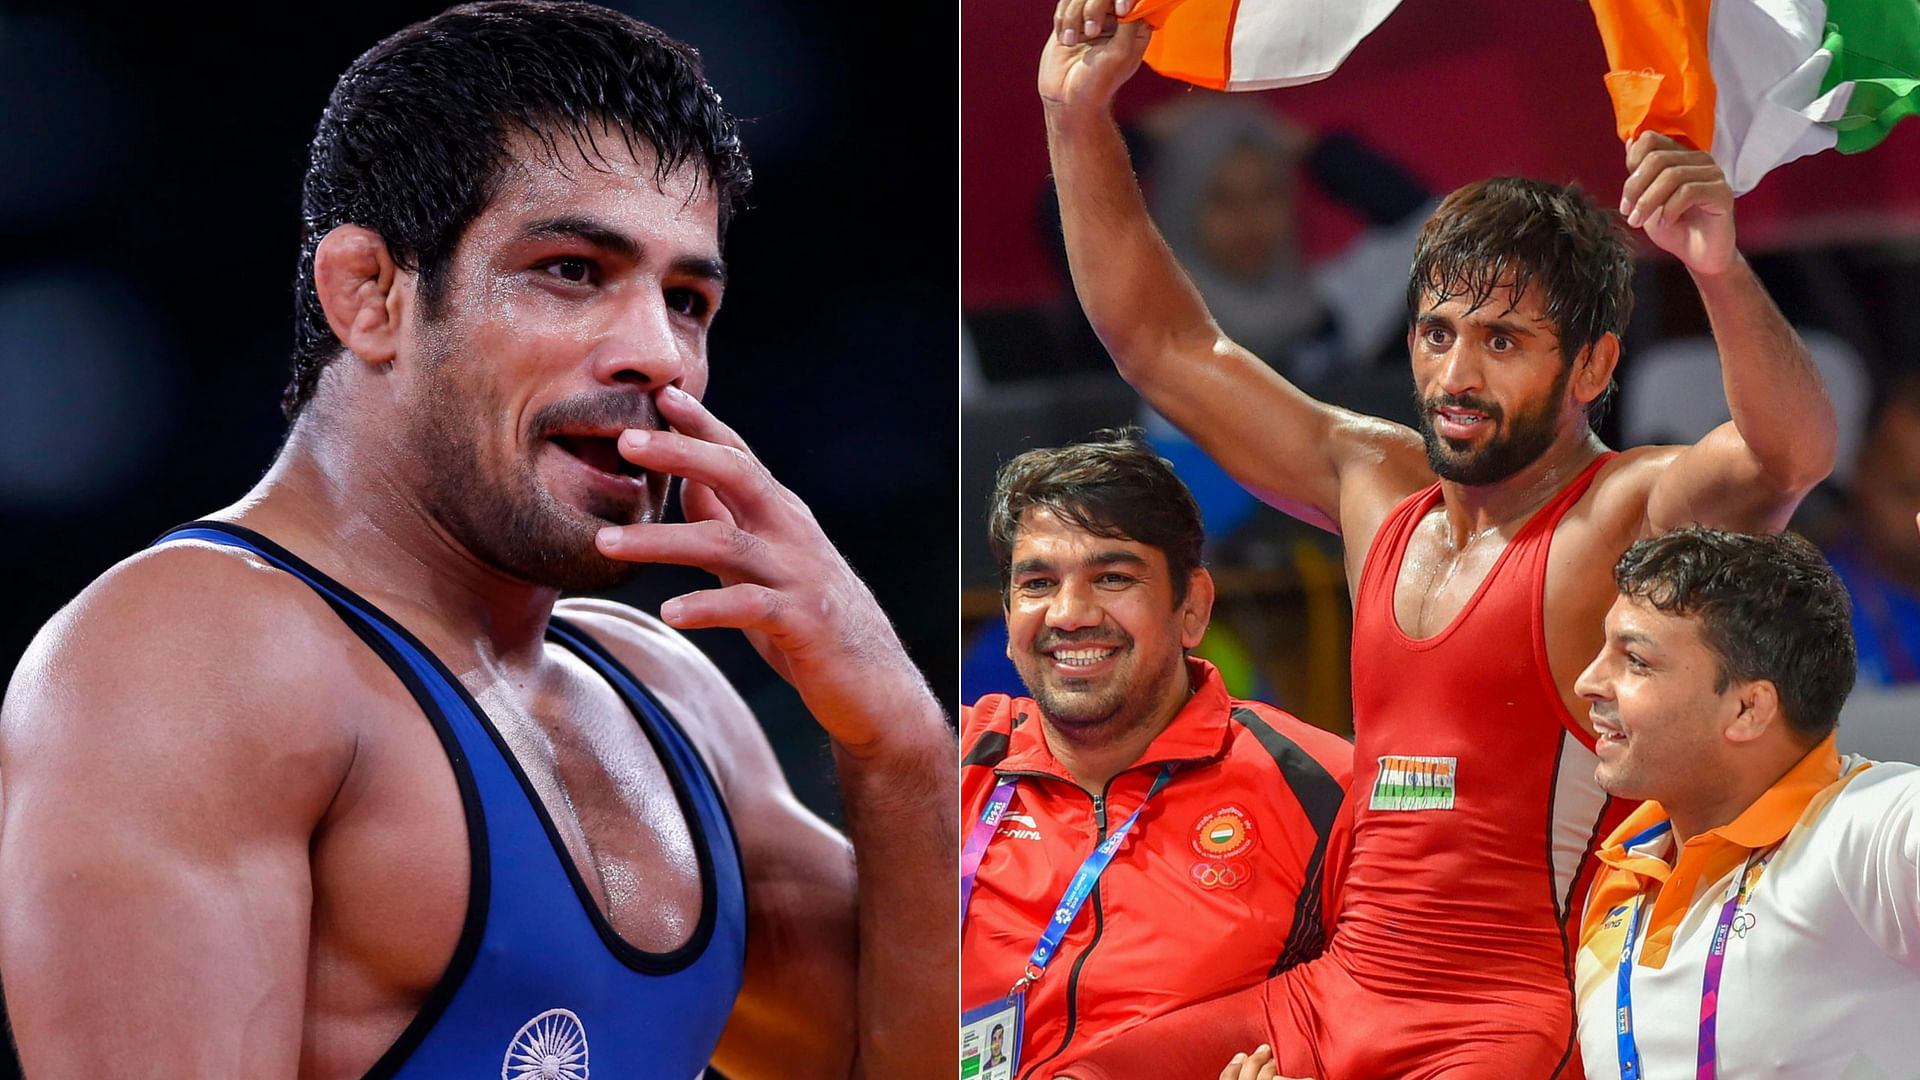 Indian wrestler Bajrang Punia on Sunday, 19 August, clinched the gold in the men’s freestyle 65 kg category